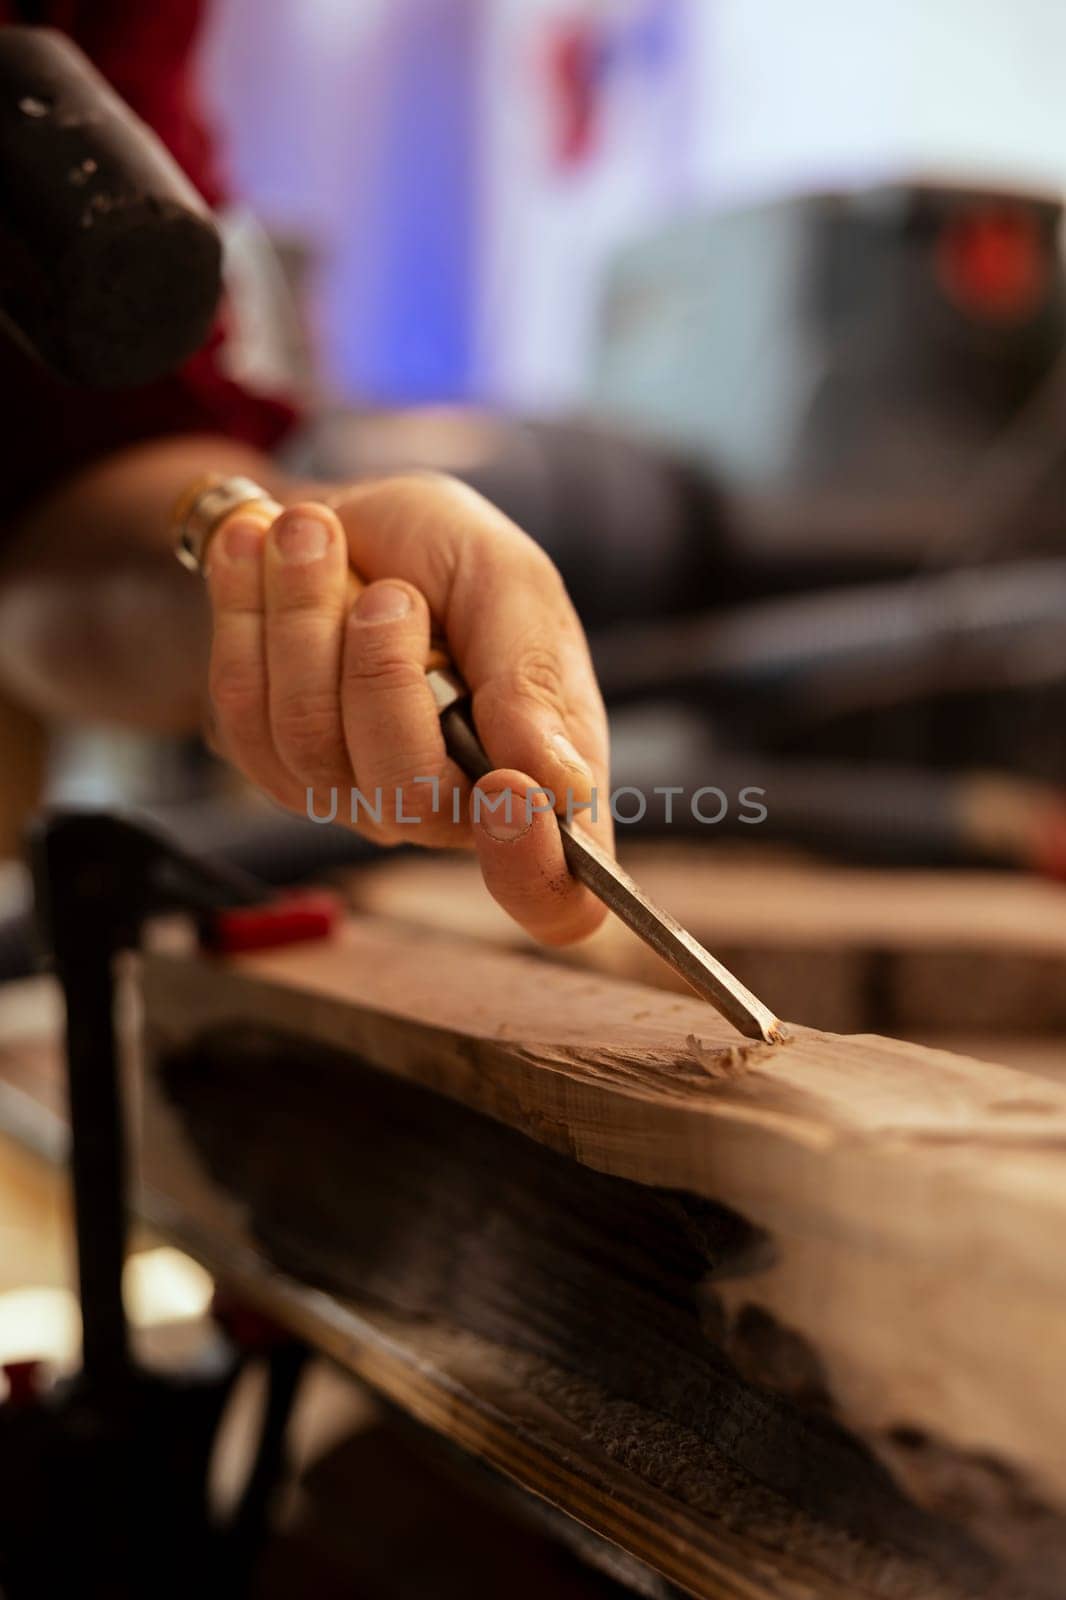 Manufacturer meticulously carving intricate designs into wood using chisel and hammer in carpentry shop. Carpenter in woodworking workshop shaping wooden pieces with tools, close up shot